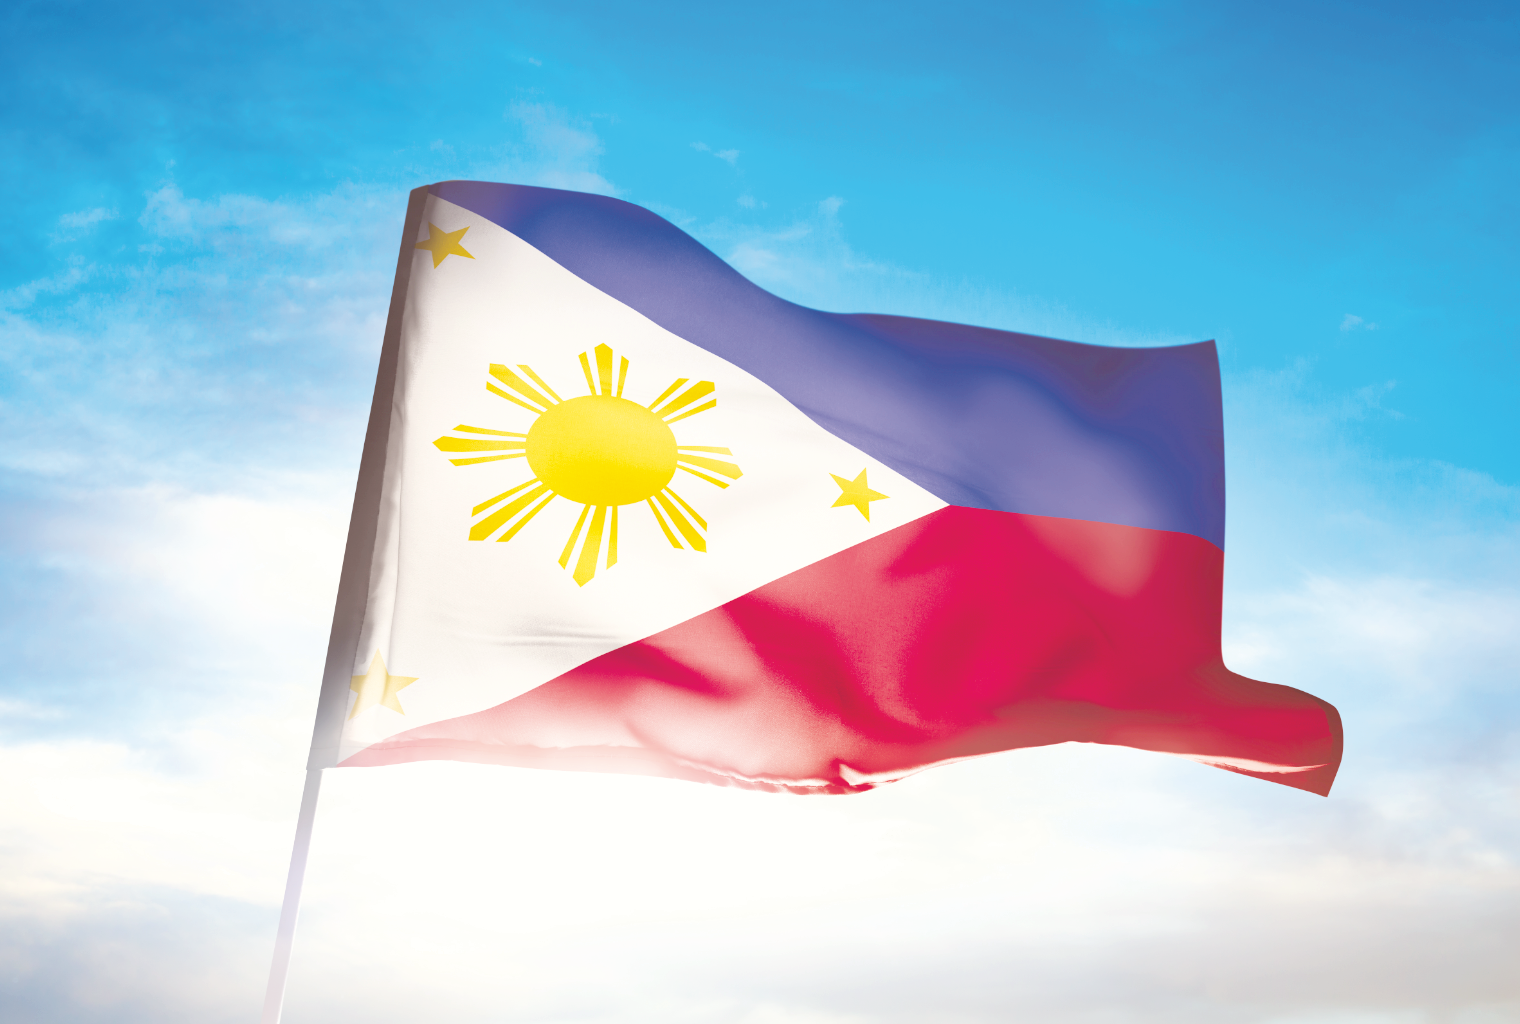 Changes Afoot for Philippine Crypto-Friendly Economic Zone